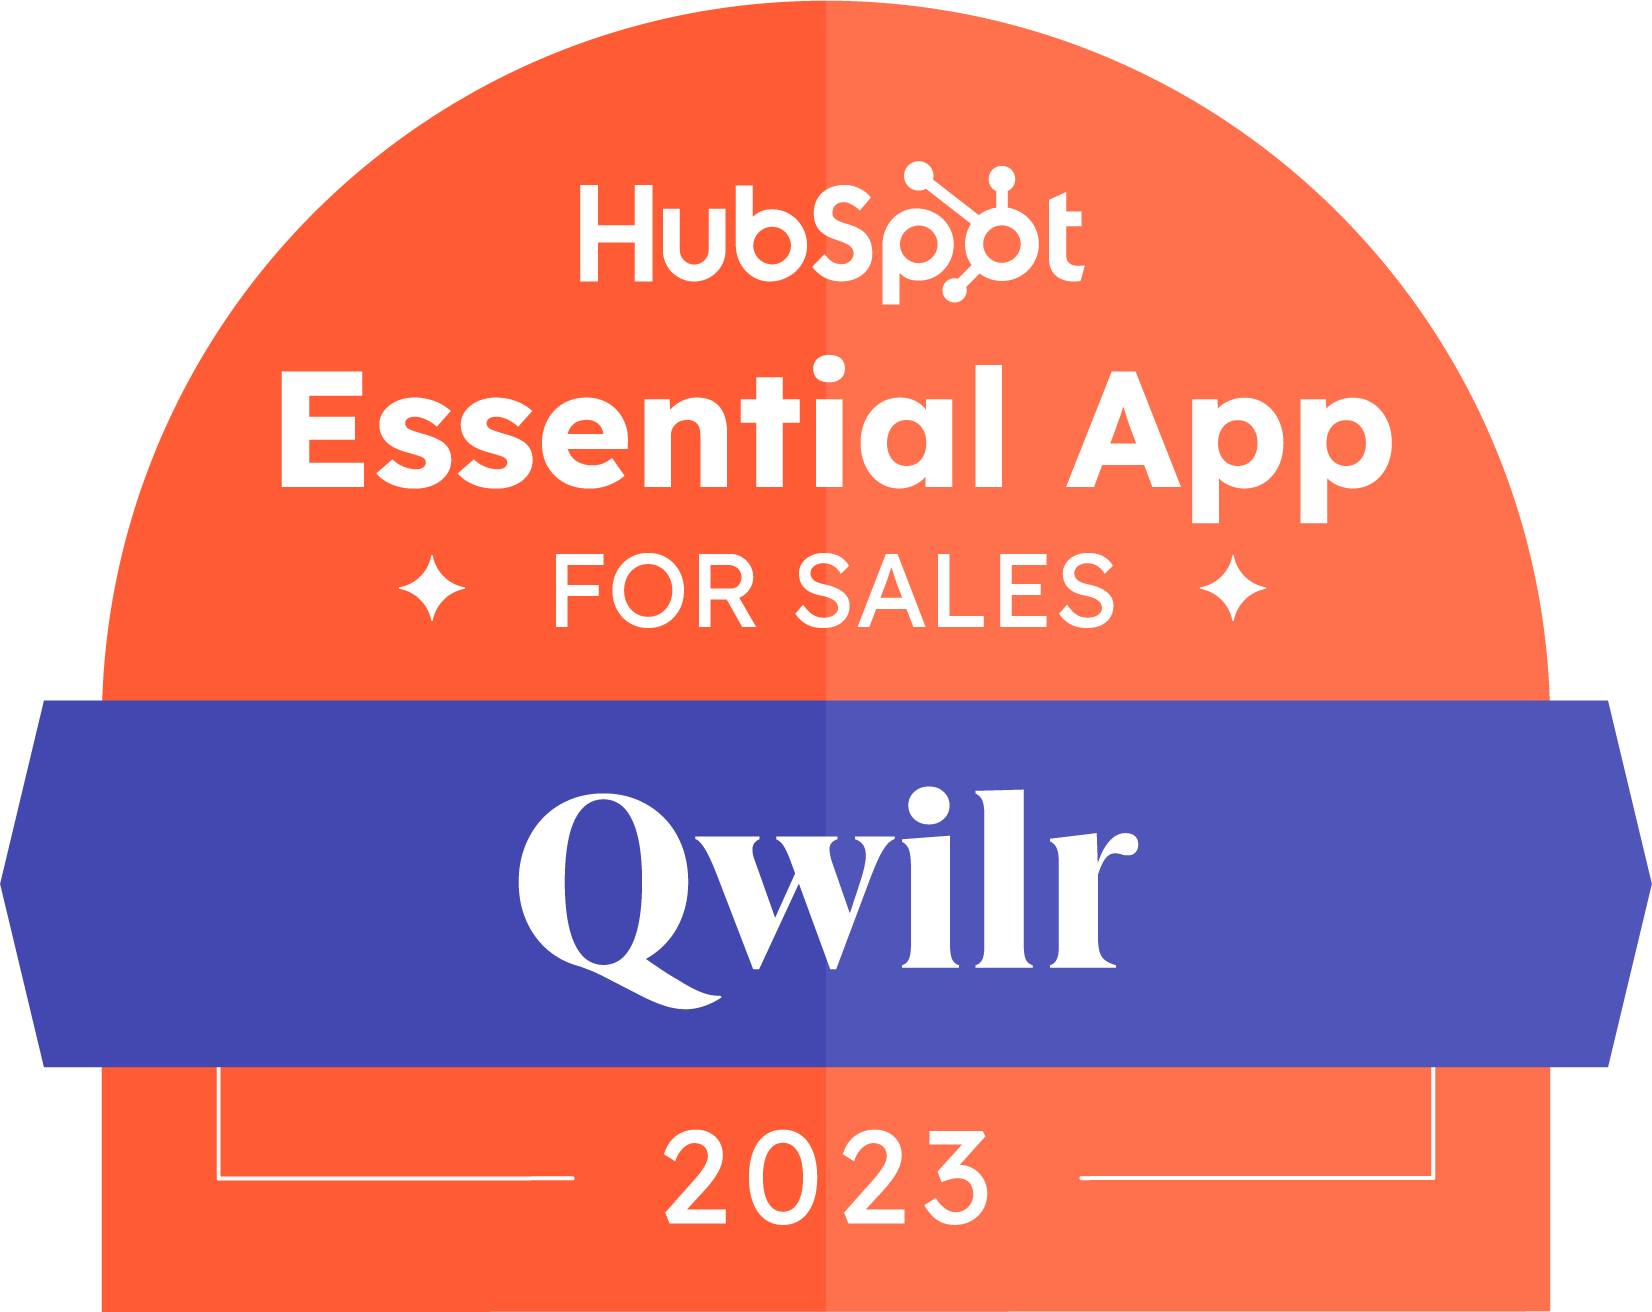 Qwilr is one of HubSpot's Essential Apps for Sales in 2023